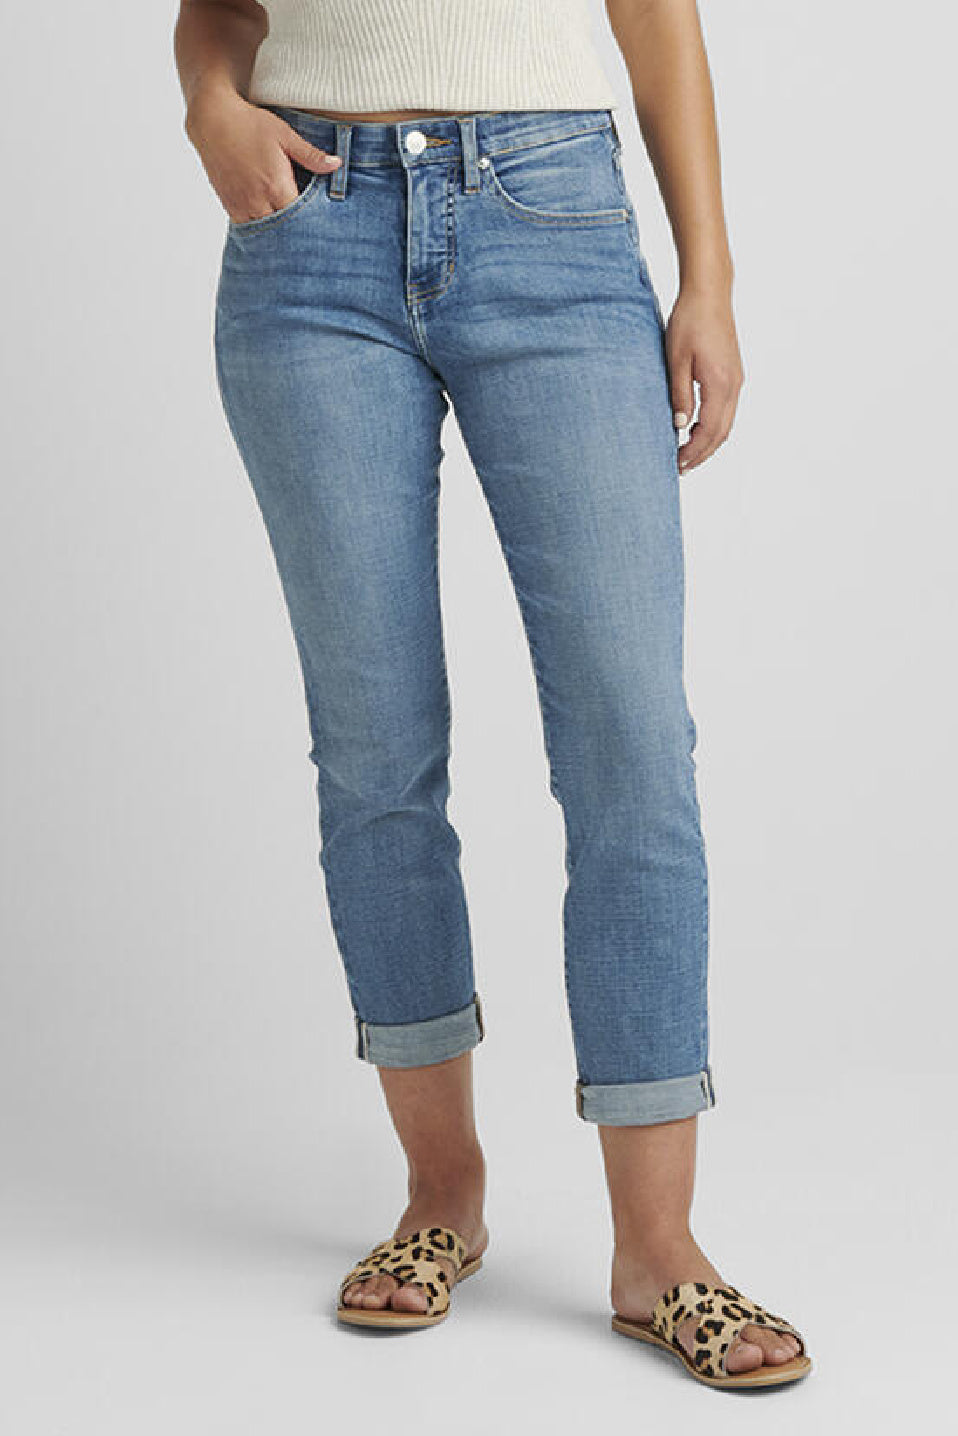 Jag Jeans Carter Mid Rise Girlfriend Jeans (Mid Vintage Wash)